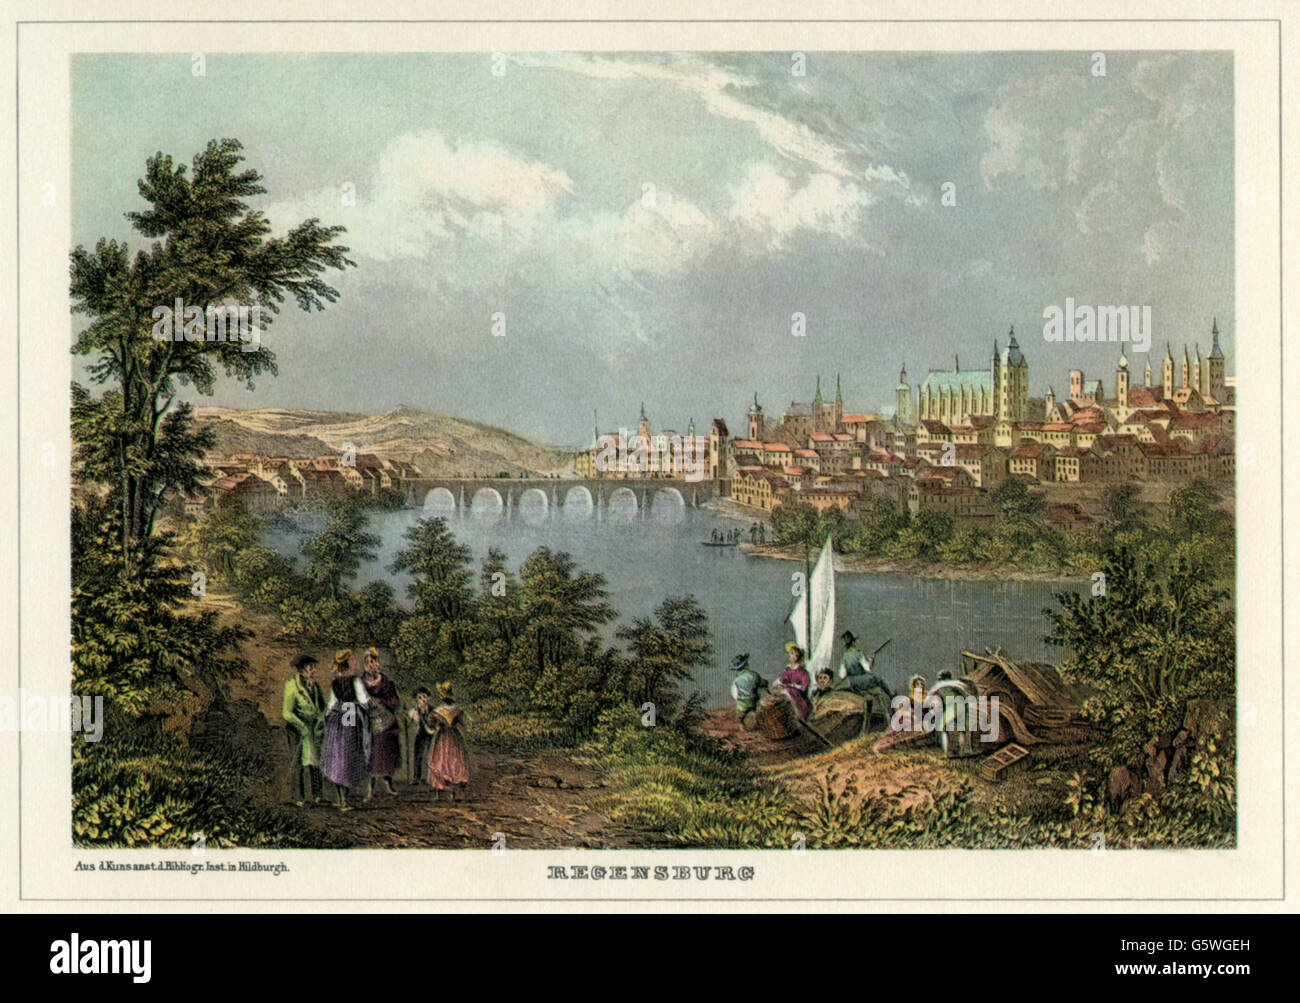 geography / travel, Germany, Regensburg, view, steel engraving, mid 19th century, Ratisbon, river, rivers, Danube, bridge, bridges, people, landscape, landscapes, Kingdom of Bavaria, Upper Palatinate, Central Europe, historic, historical, Additional-Rights-Clearences-Not Available Stock Photo